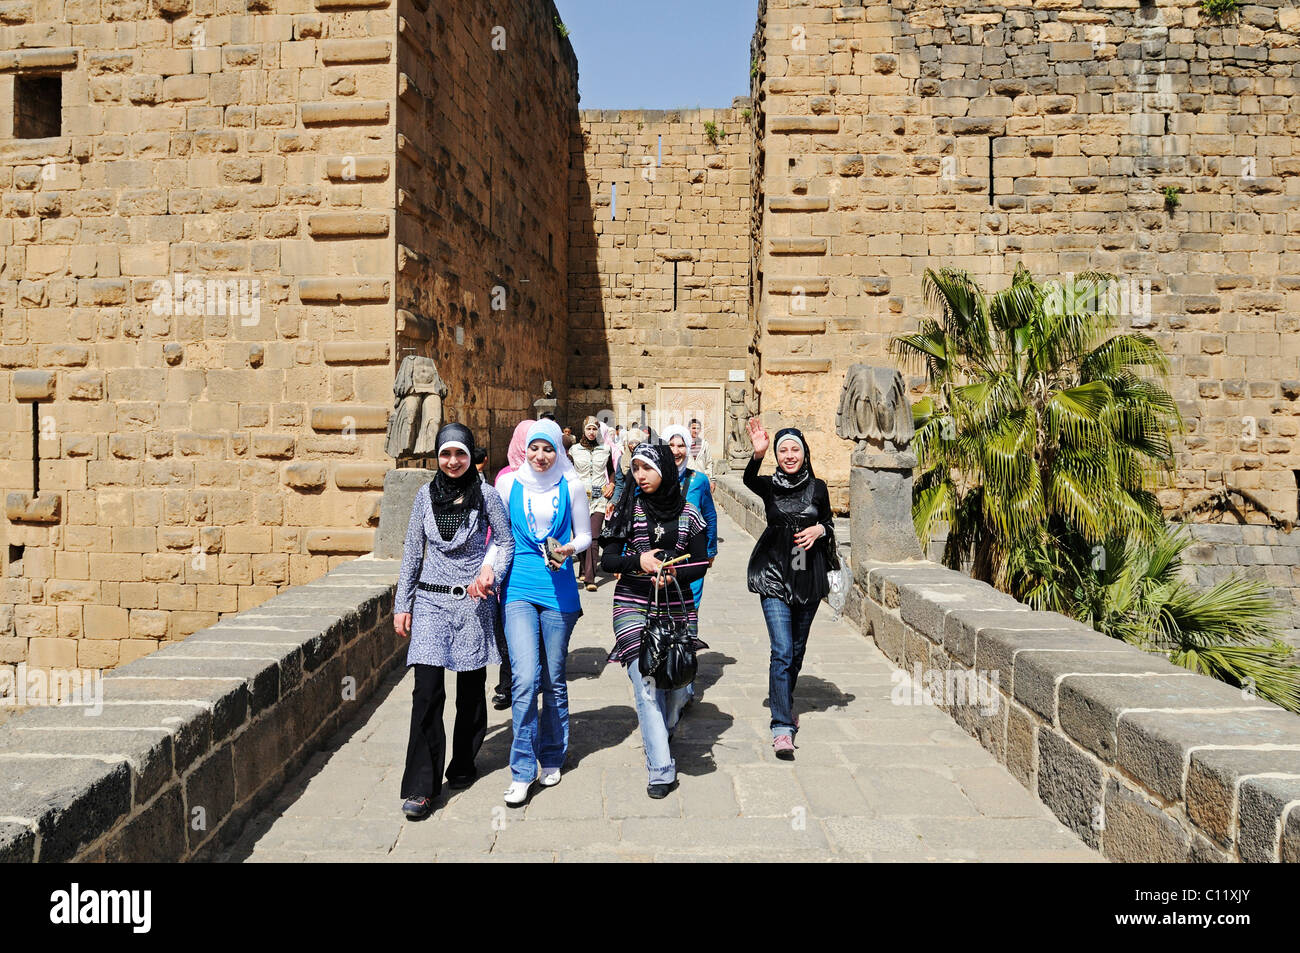 Young women wearing headscarves at the entrance, Roman theater in Bosra, Syria, Asia Stock Photo